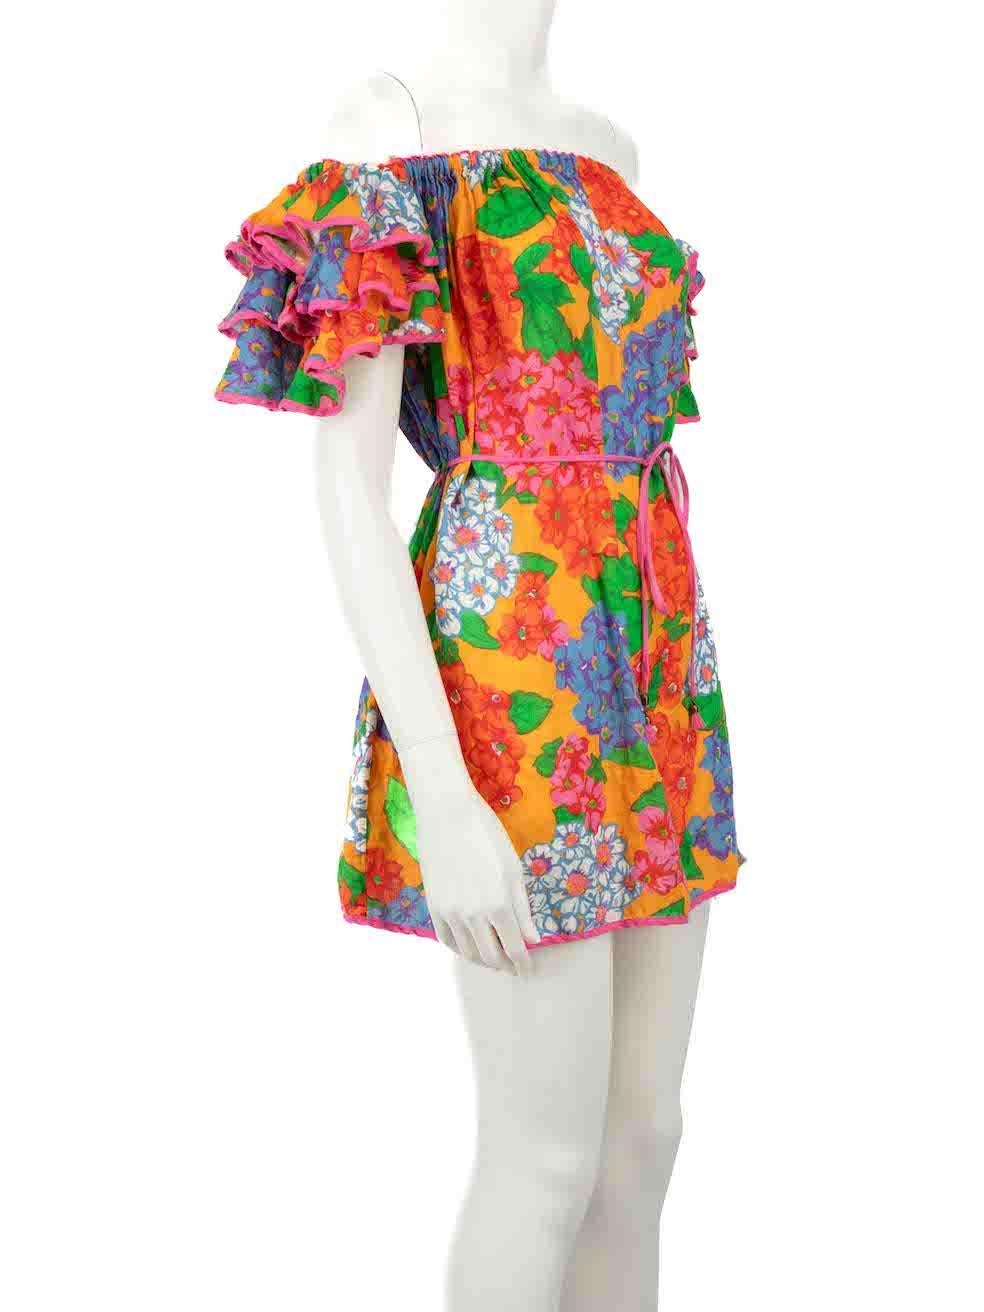 CONDITION is Very good. Minimal wear to dress is evident. Minimal pulls to fabric on the front of this used Zimmermann designer resale item.
 
 
 
 Details
 
 
 Multicolour
 
 Linen
 
 Dress
 
 Floral pattern
 
 Off-the-Shoulder
 
 Short ruffle